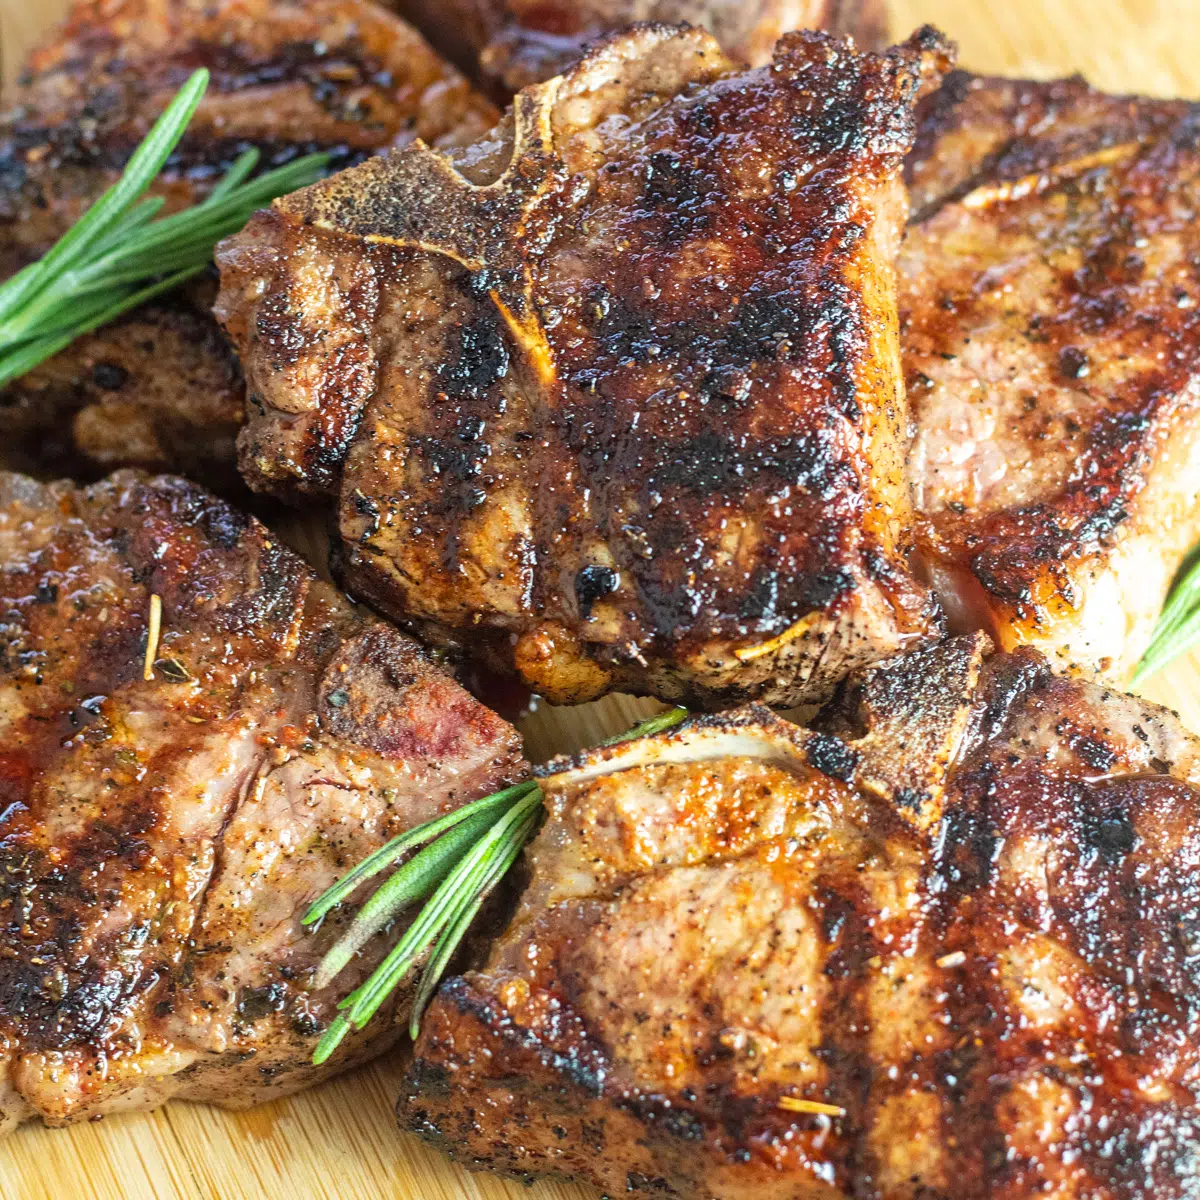 Square image of grilled lamb chops on a wooden cutting board.